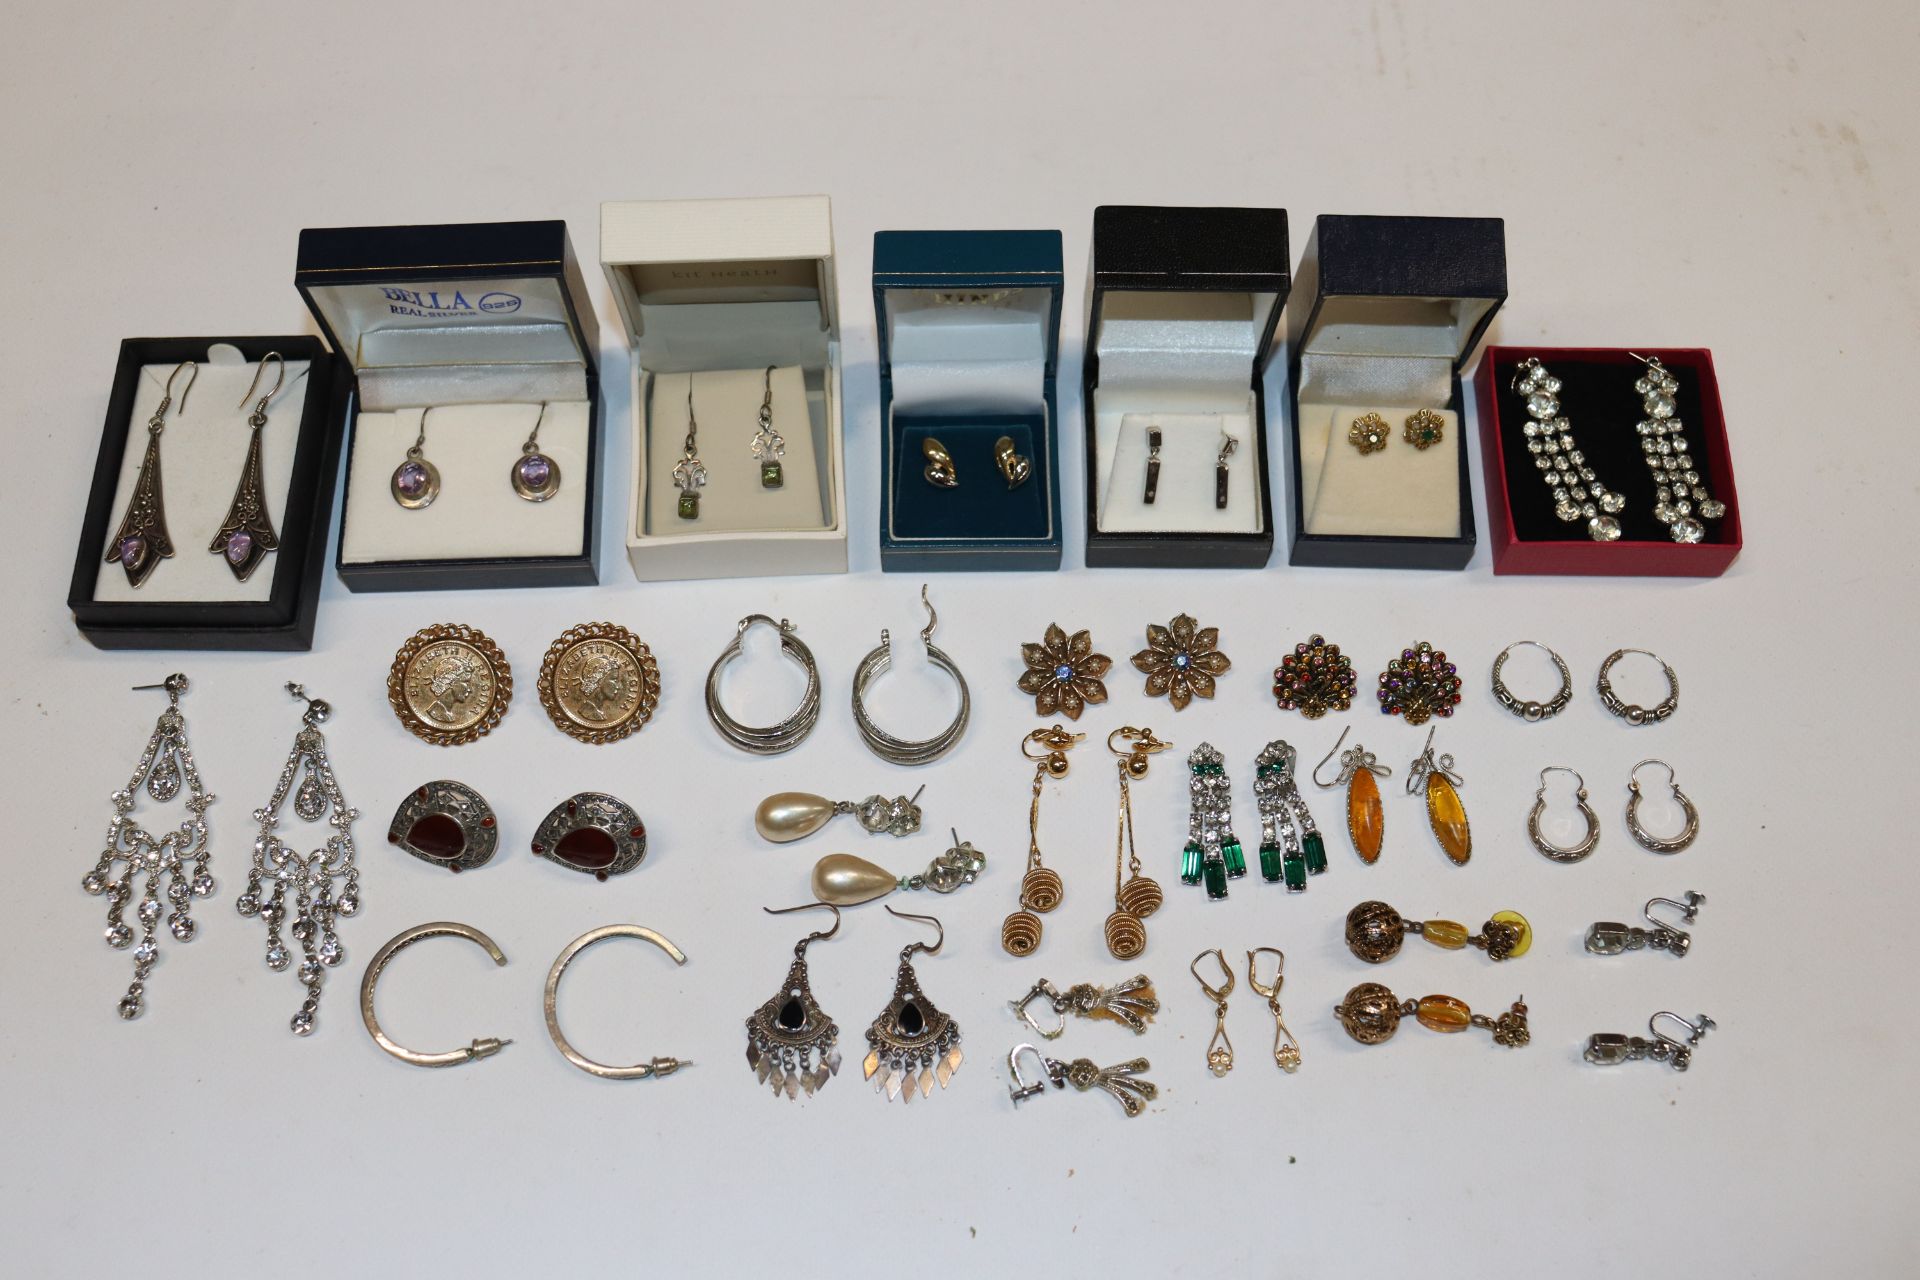 A box containing numerous pairs of decorative ear-r